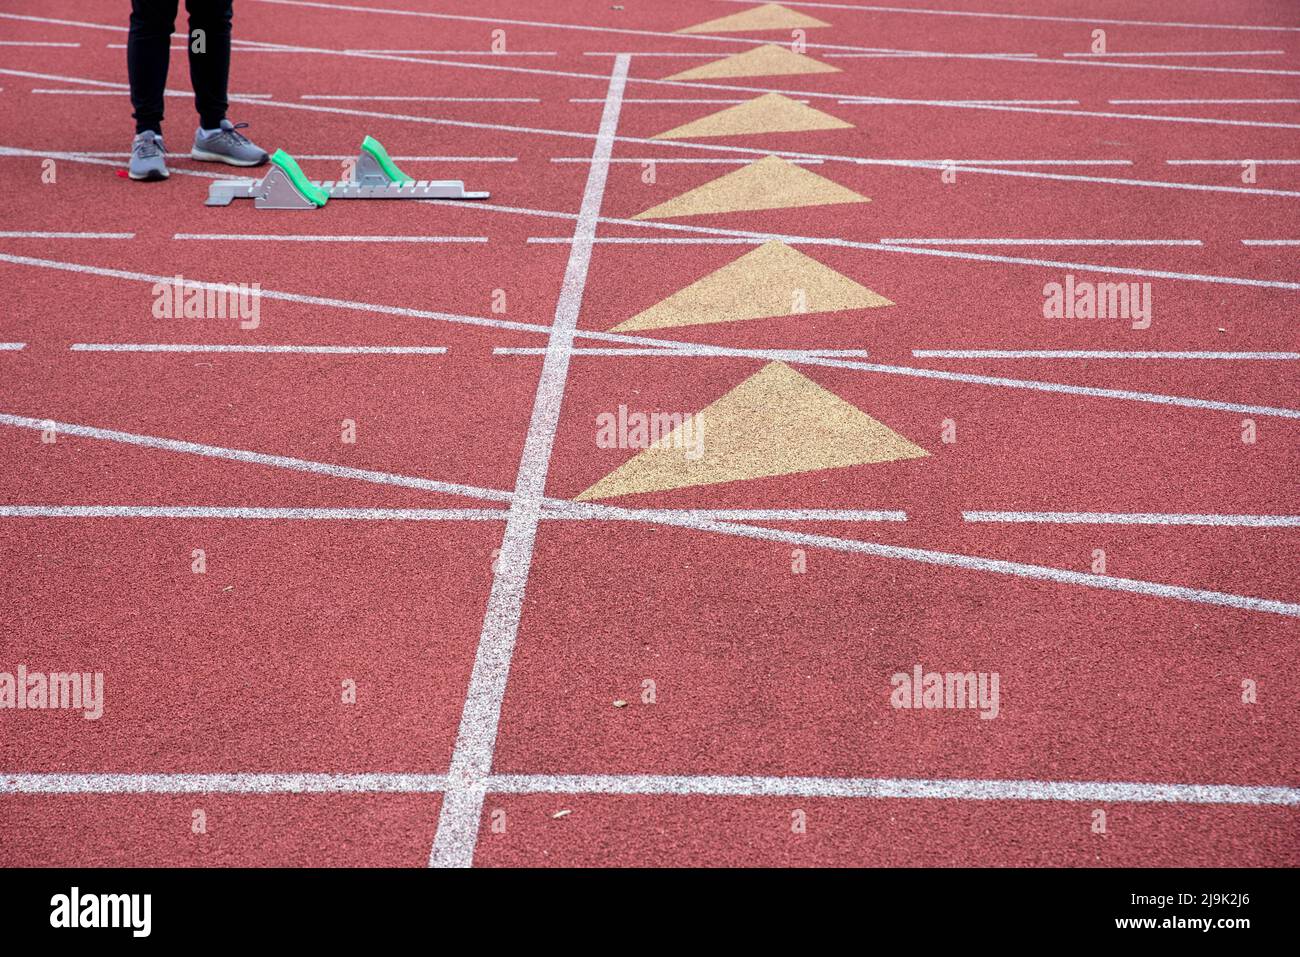 One runner stands by a starting block on an empty athletic track Stock Photo